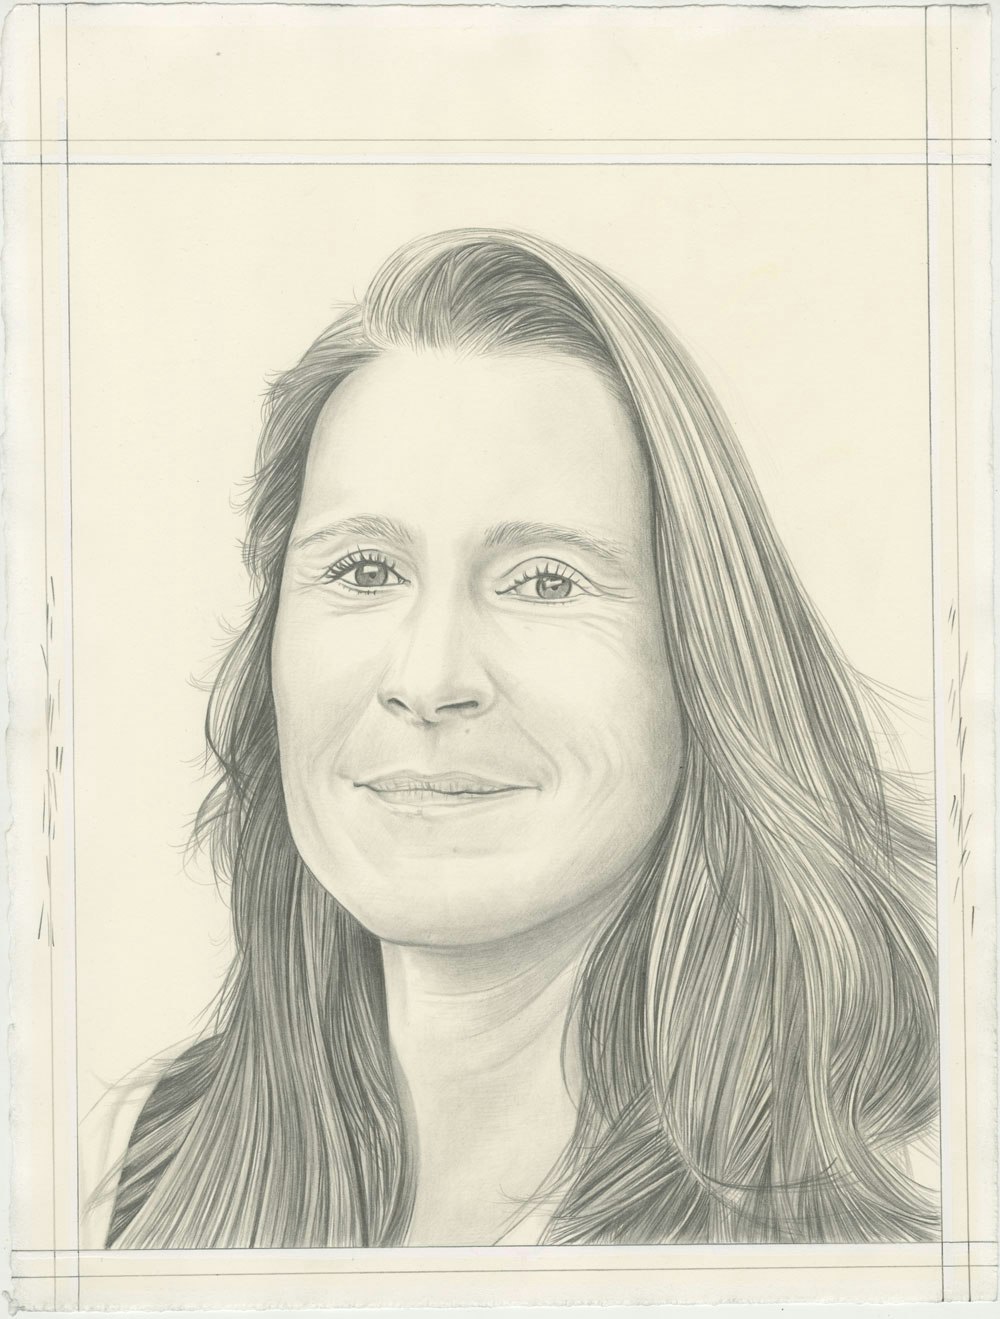 Portrait of Catherine Gund, pencil on paper by Phong H. Bui.